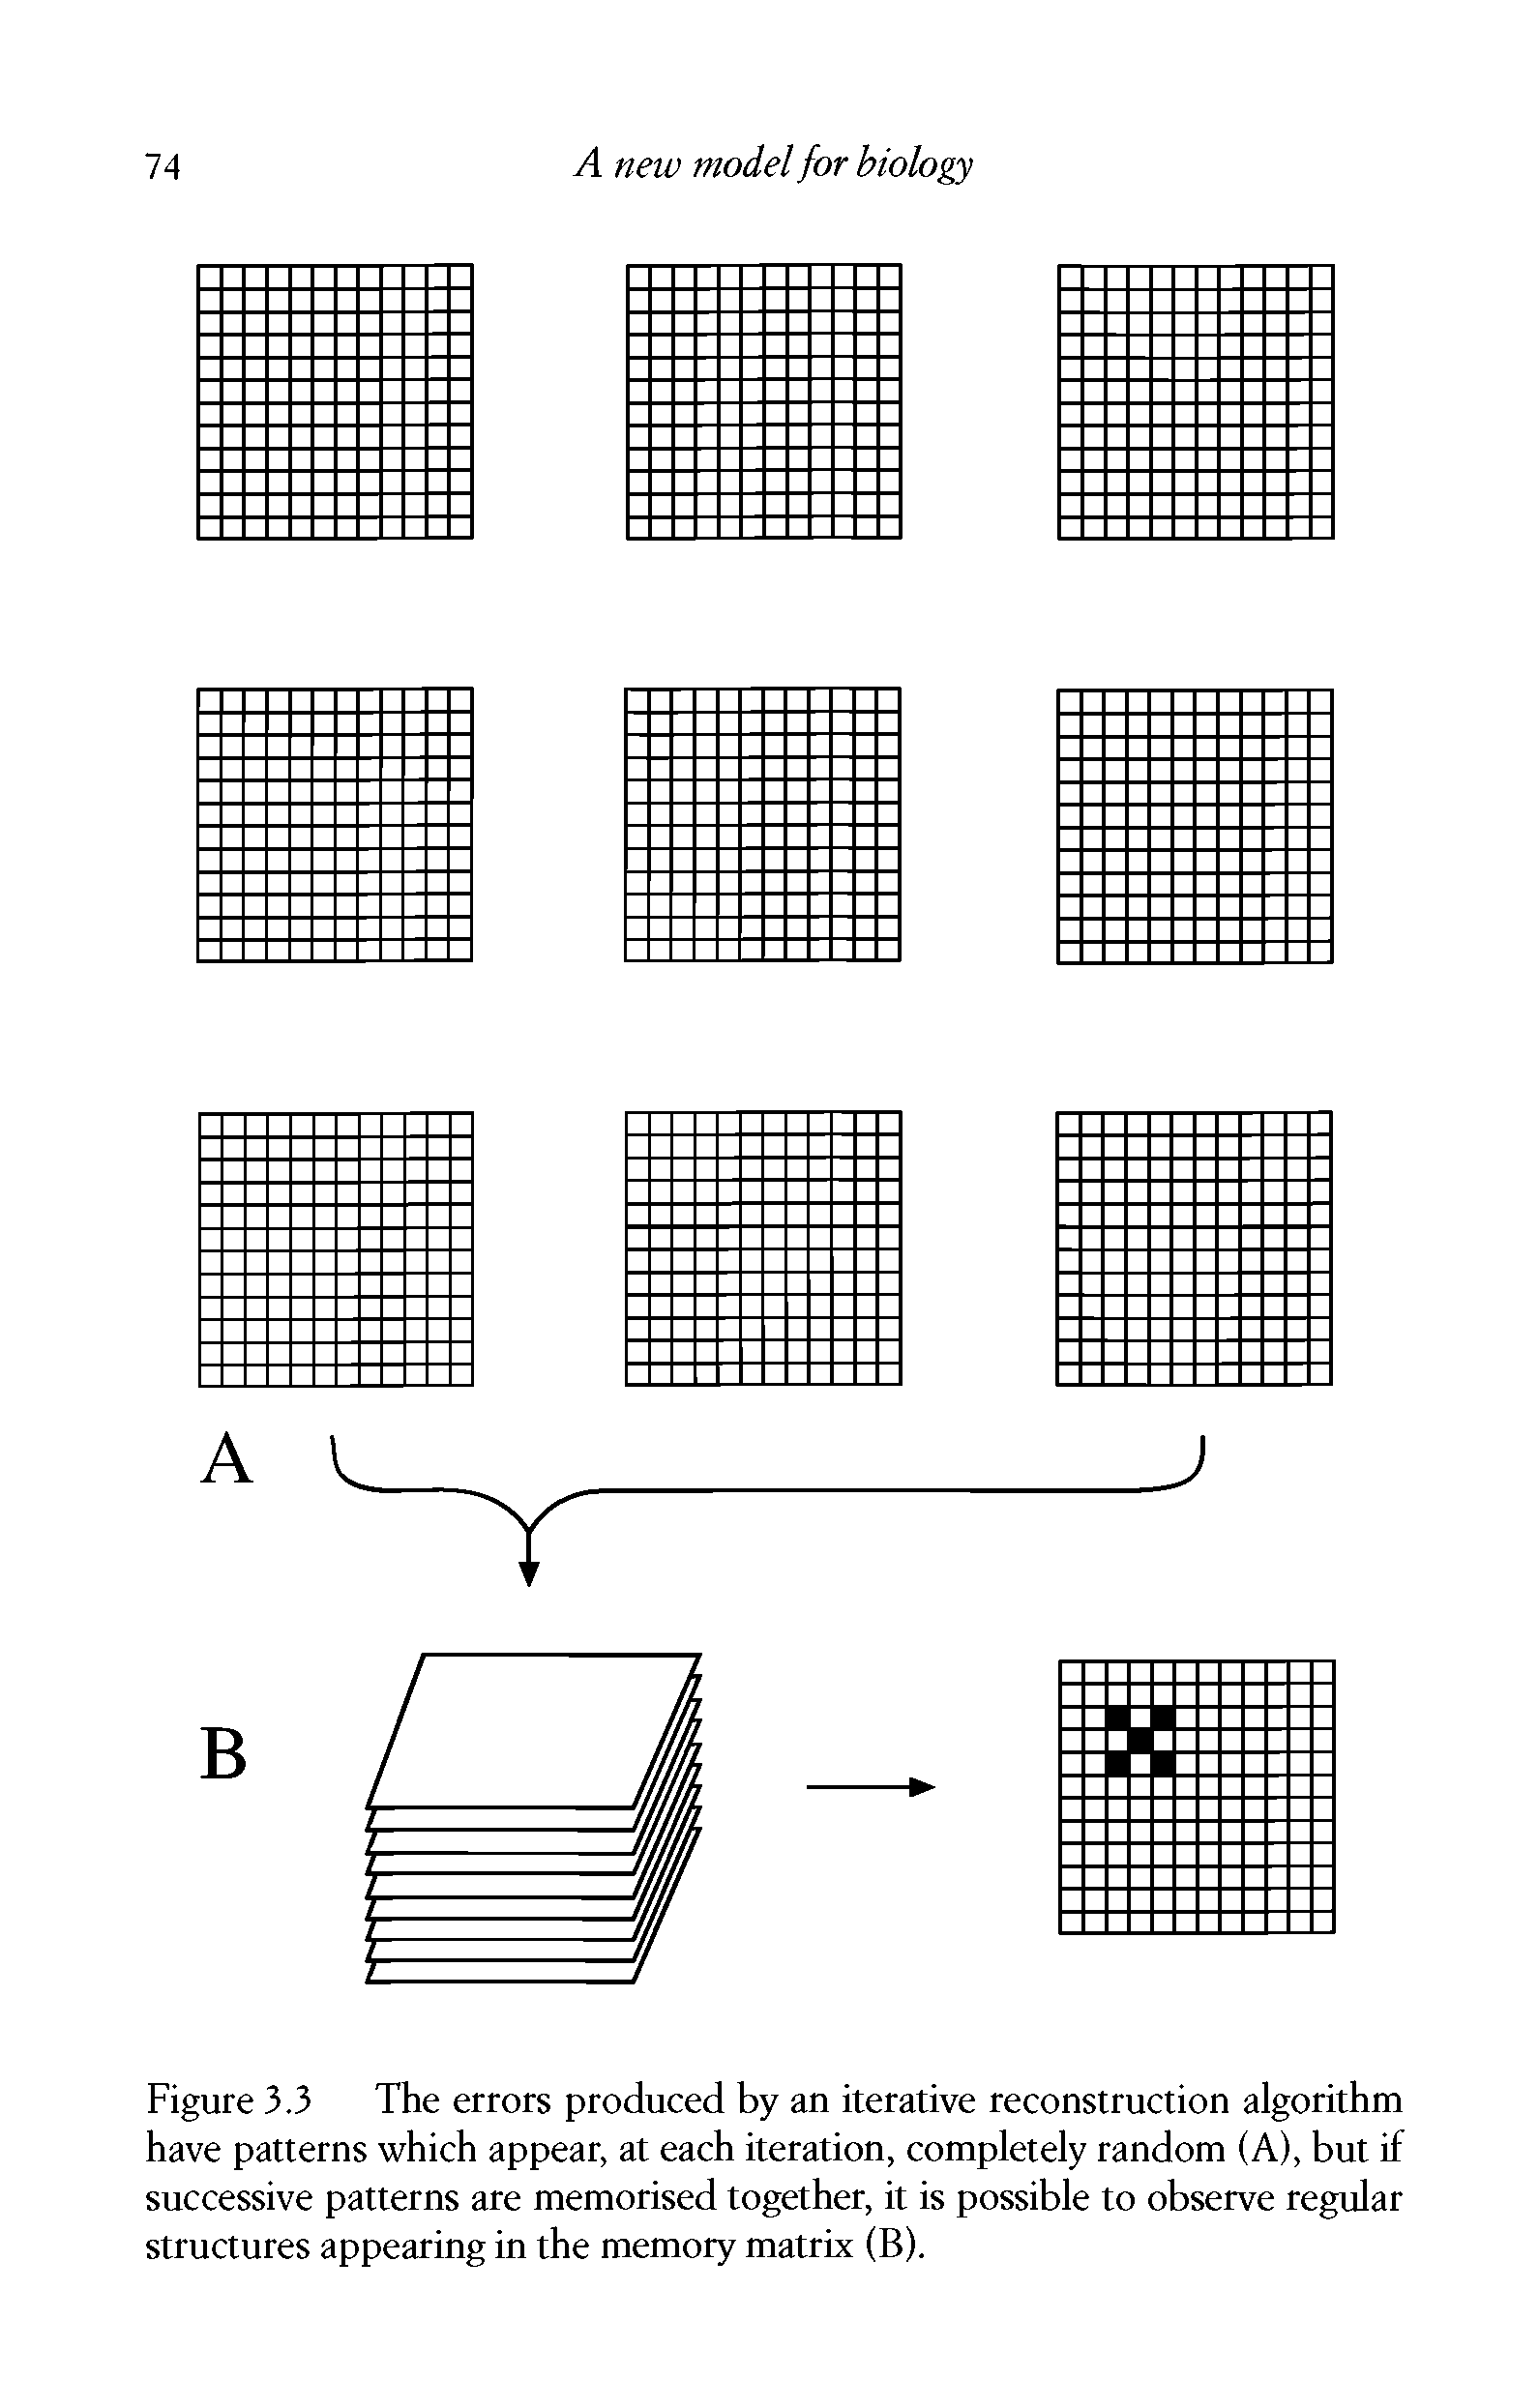 Figure 3.3 The errors produced by an iterative reconstruction algorithm have patterns which appear, at each iteration, completely random (A), but if successive patterns are memorised together, it is possible to observe regular structures appearing in the memory matrix (B).